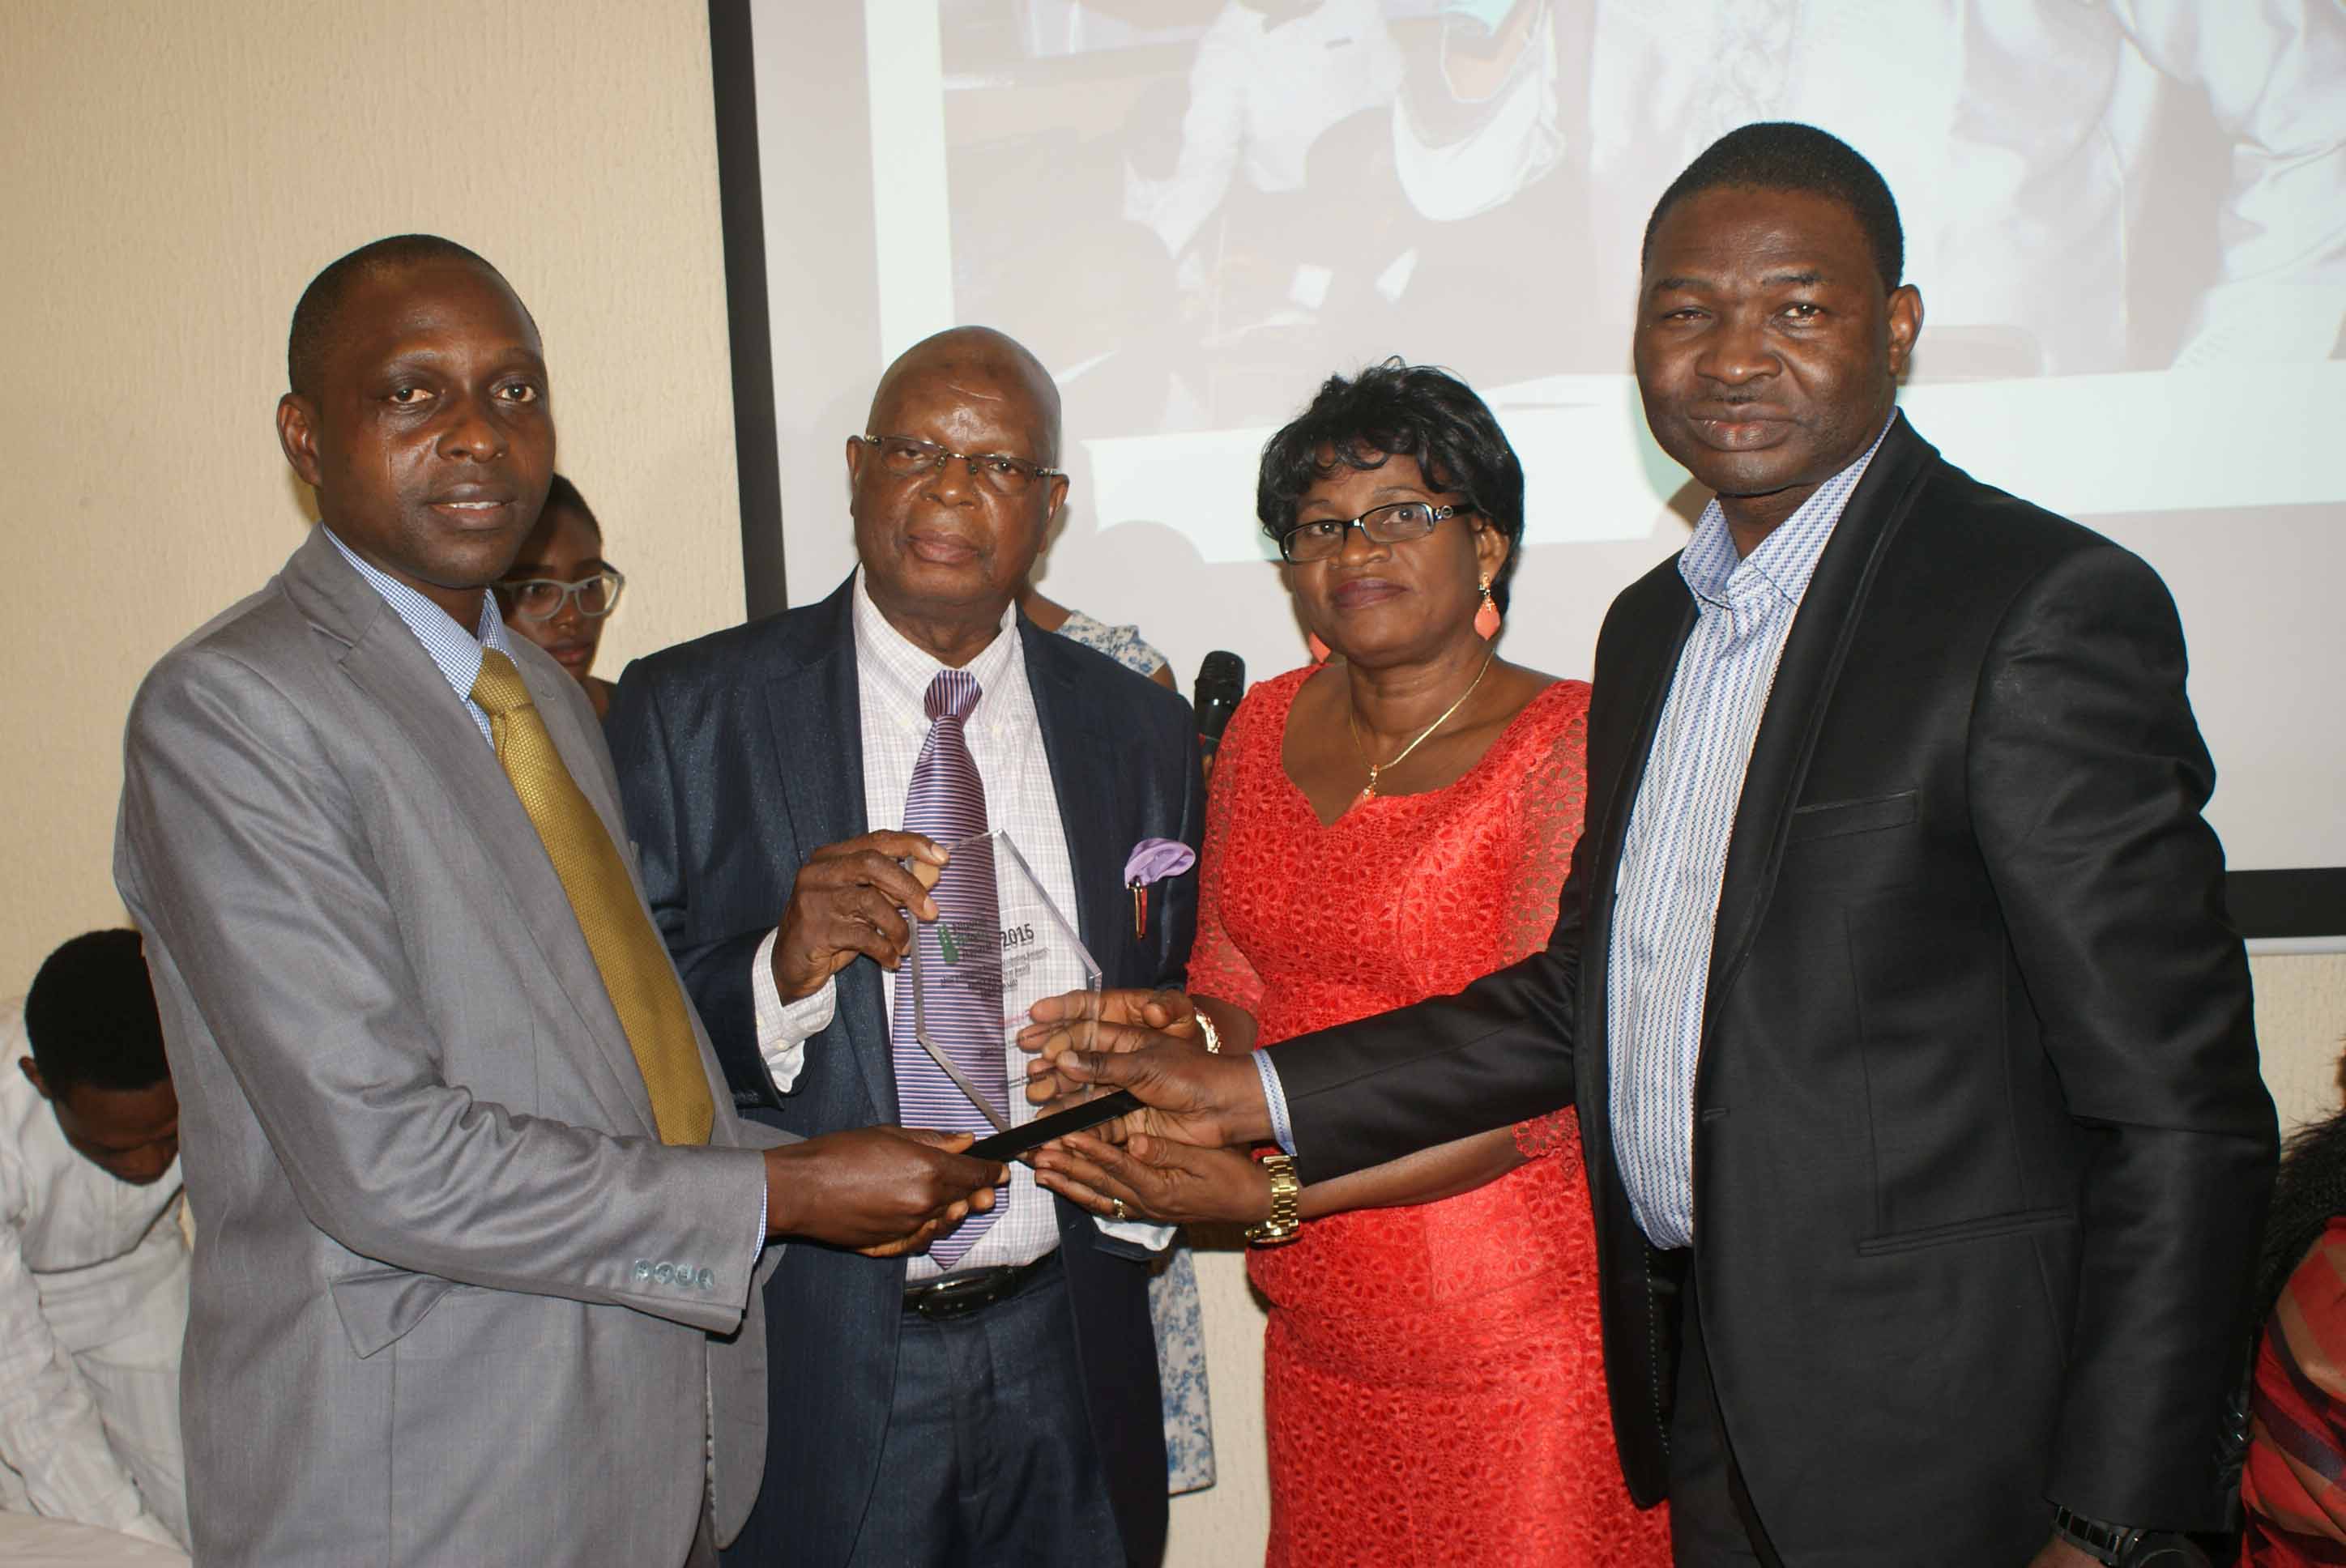 Dr. Josiah Ebhomenye of Market Trends receives award from Mr. Feyisola, MD, Media Stamp